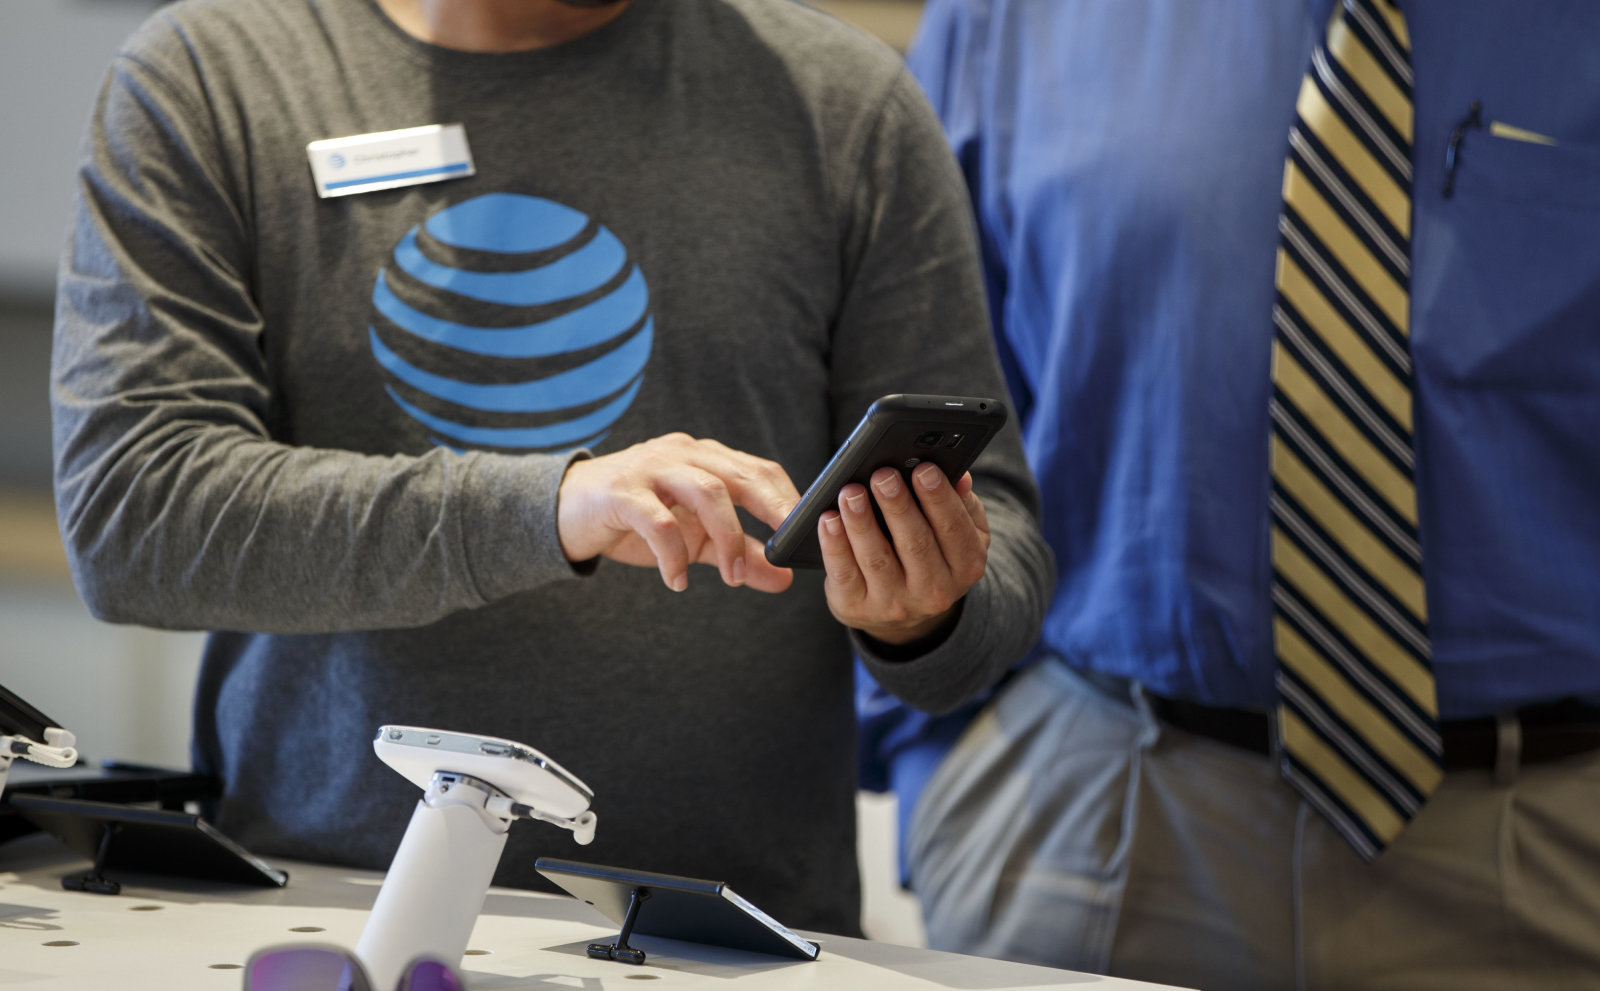 An employee helps a customer with a smartphone at an AT&T Inc. store in Newport Beach, California, U.S., on Thursday, Aug. 10, 2017. AT&T Inc. shares surged the most in more than eight years after the telecommunications giant posted a surprise wireless subscriber gain in the second quarter, showing it can fend for itself in a cutthroat price war. An offer for unlimited wireless data, bundled with discounted streaming-TV service, helping AT&T bide its time while awaiting regulatory approval to transform into a media powerhouse through the $85.4 billion purchase of Time Warner Inc. Photographer: Patrick T. Fallon/Bloomberg via Getty Images